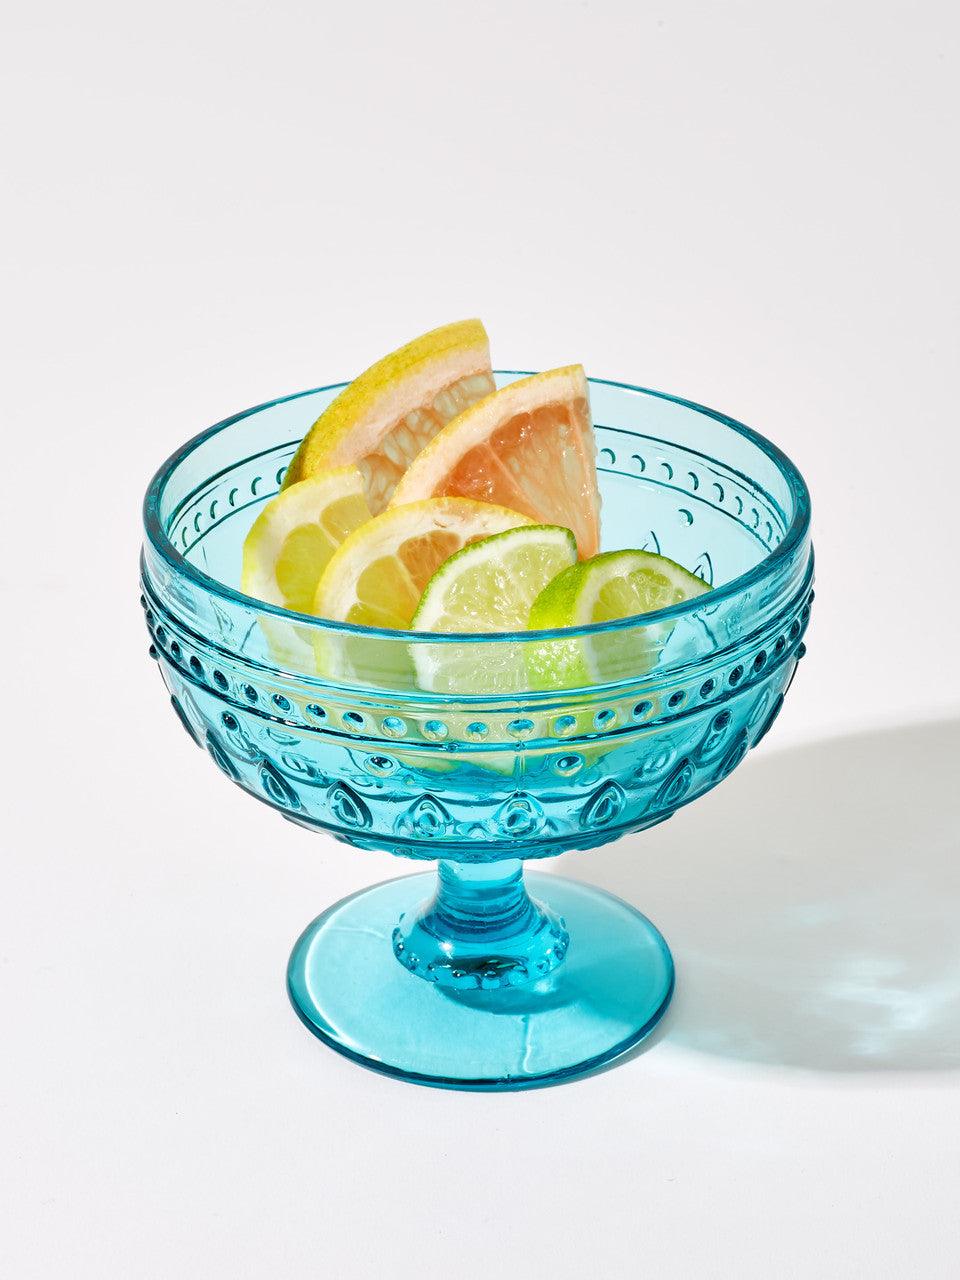 Fez Footed Compote Glass Bowls -- Set of 4 - Euro Ceramica 